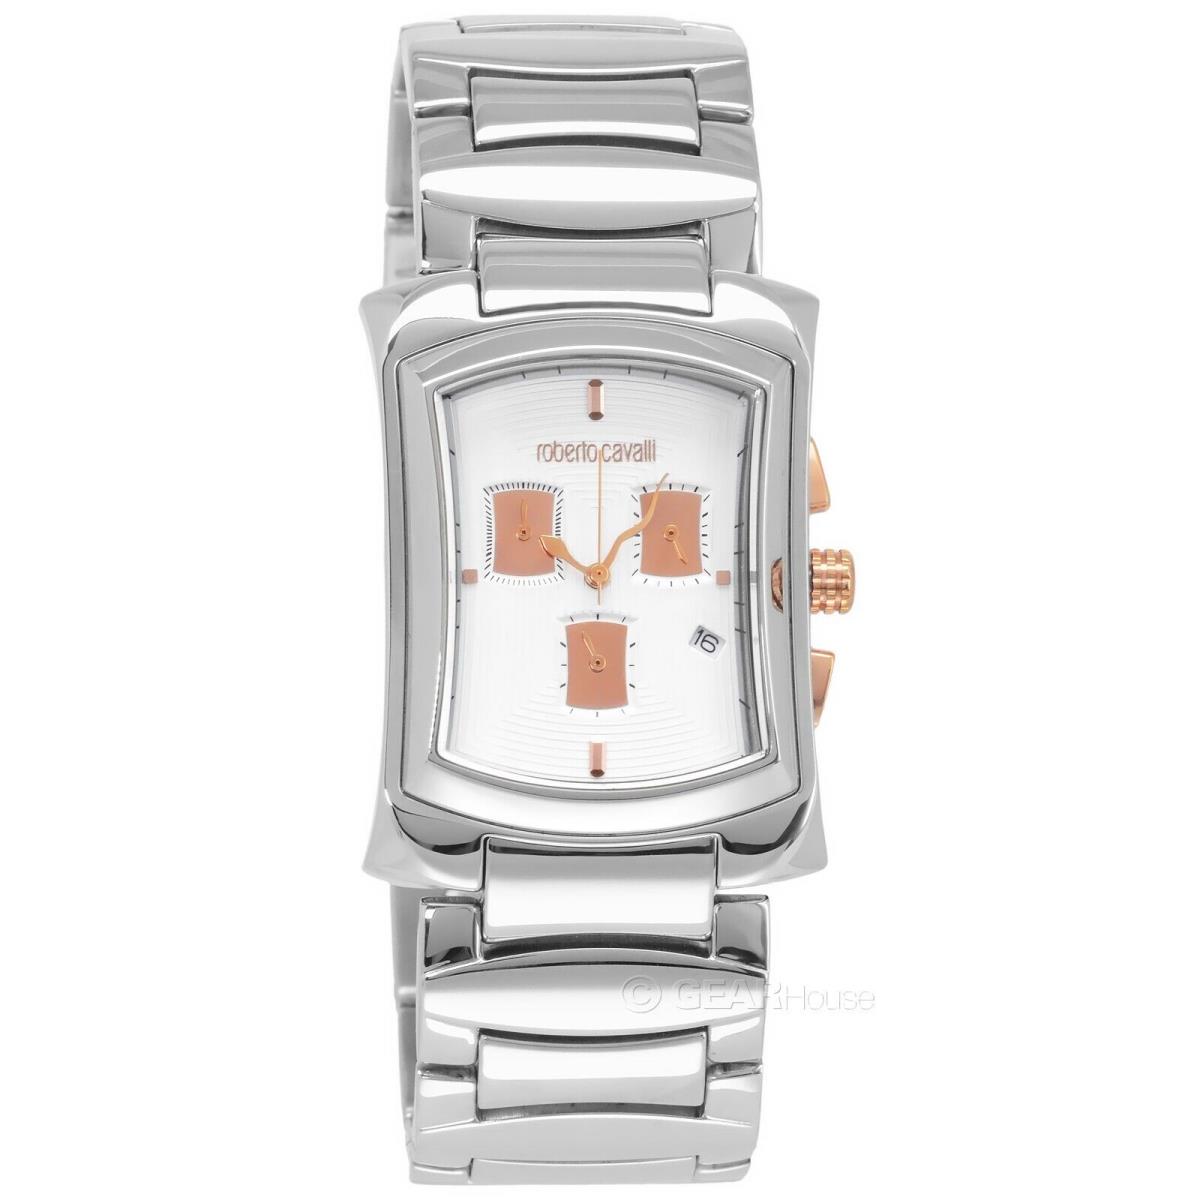 Roberto Cavalli Tomahawk Mens Chronograph Watch White Rose Gold Silver Steel - Dial: Rose Gold, Band: Silver, Bezel: Silver